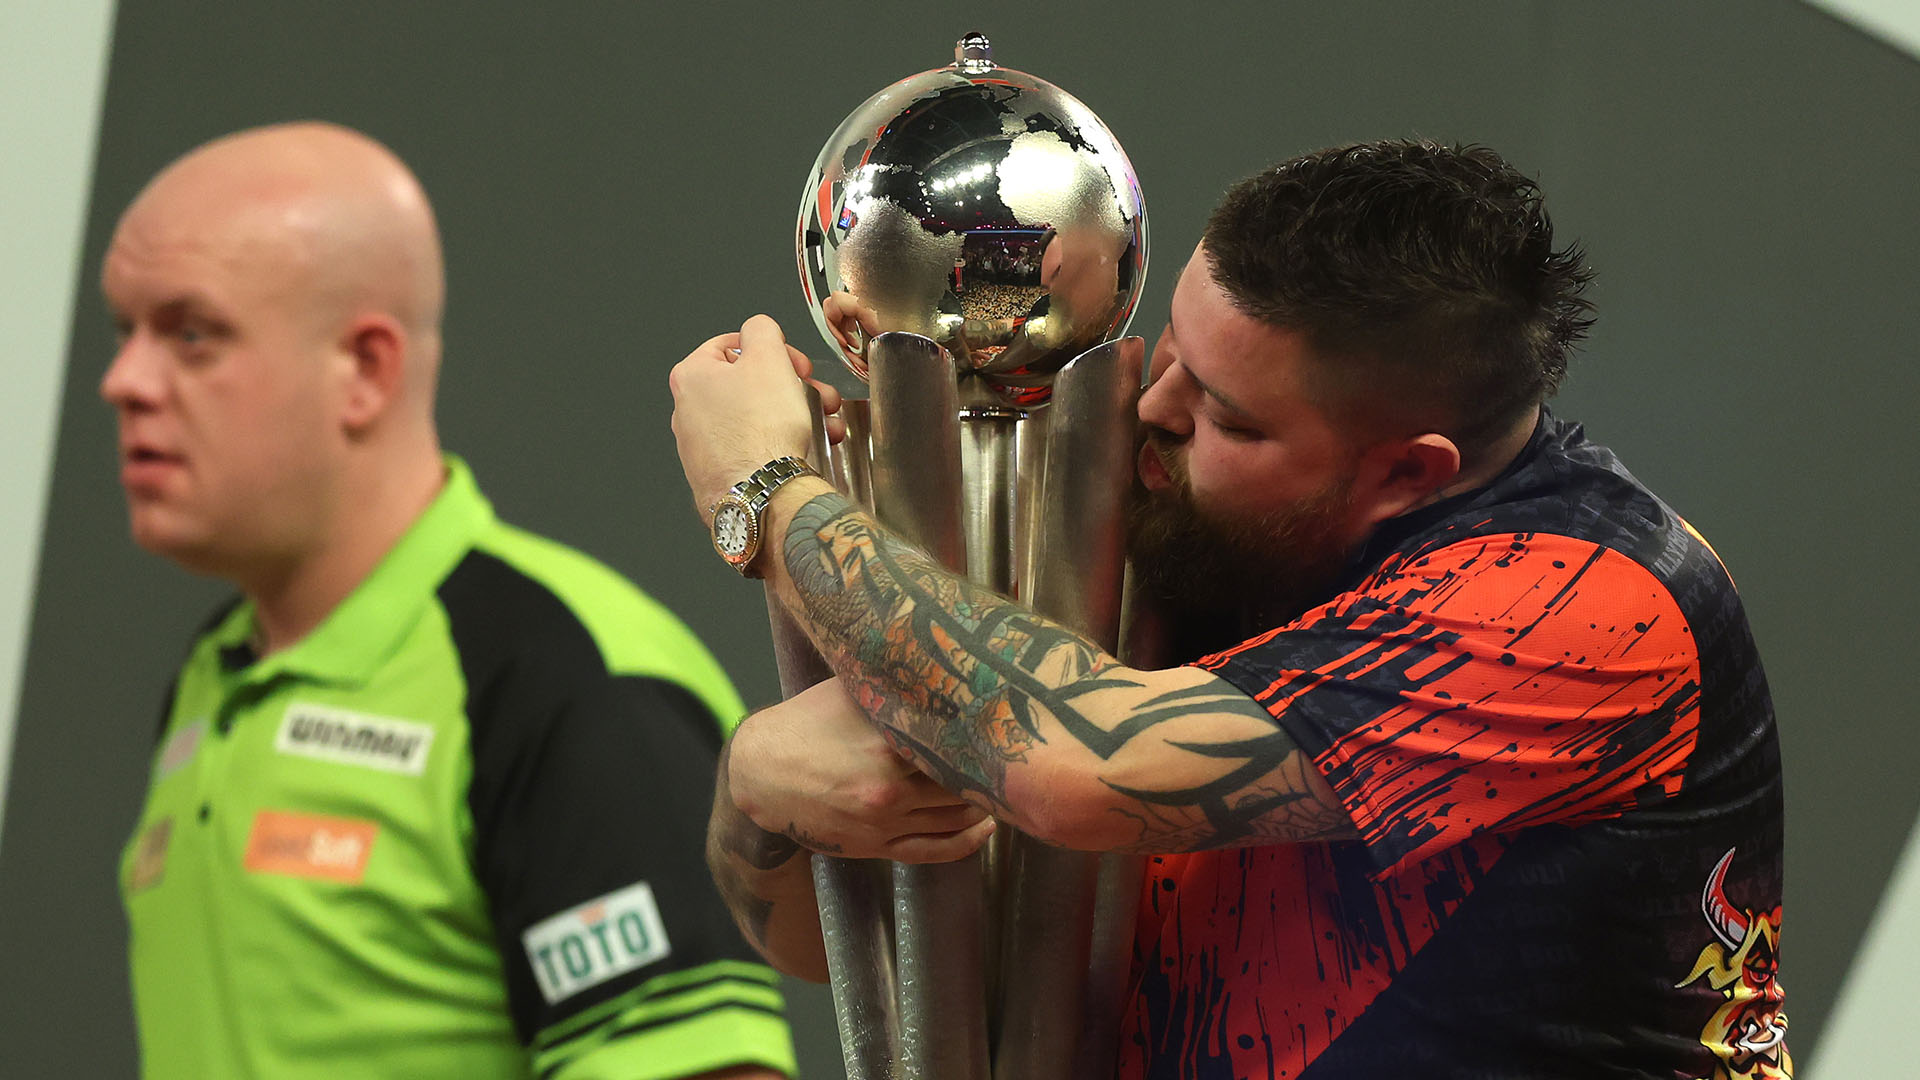 Darts results: Nine-dart hero Smith first PDC World Championship after beating Michael van Gerwen in an epic Ally Pally final